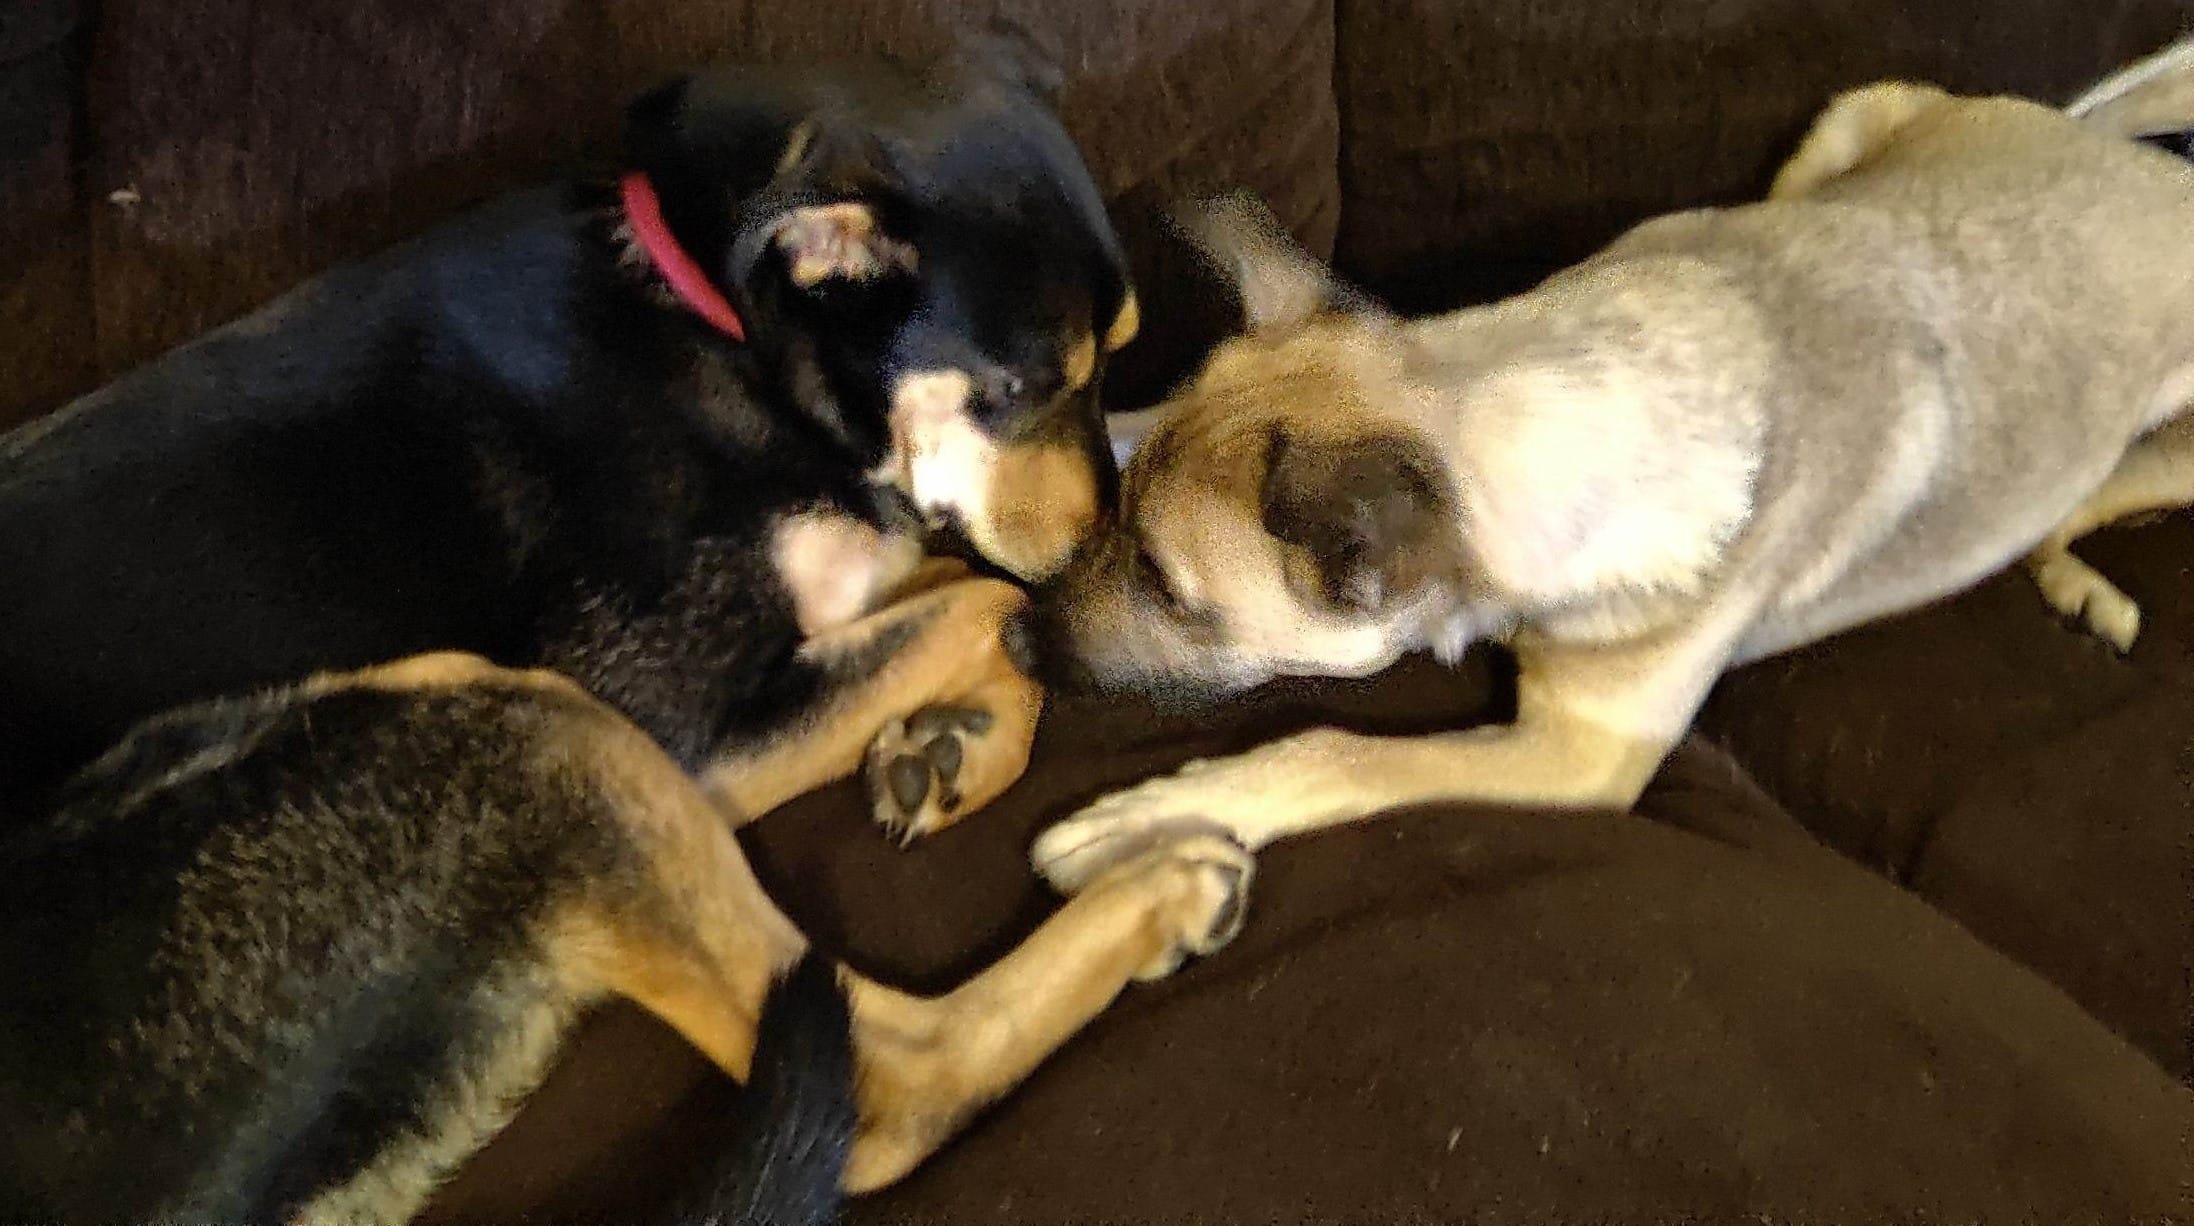 Two pups, Sadie and Anny, nose to nose, on a couch